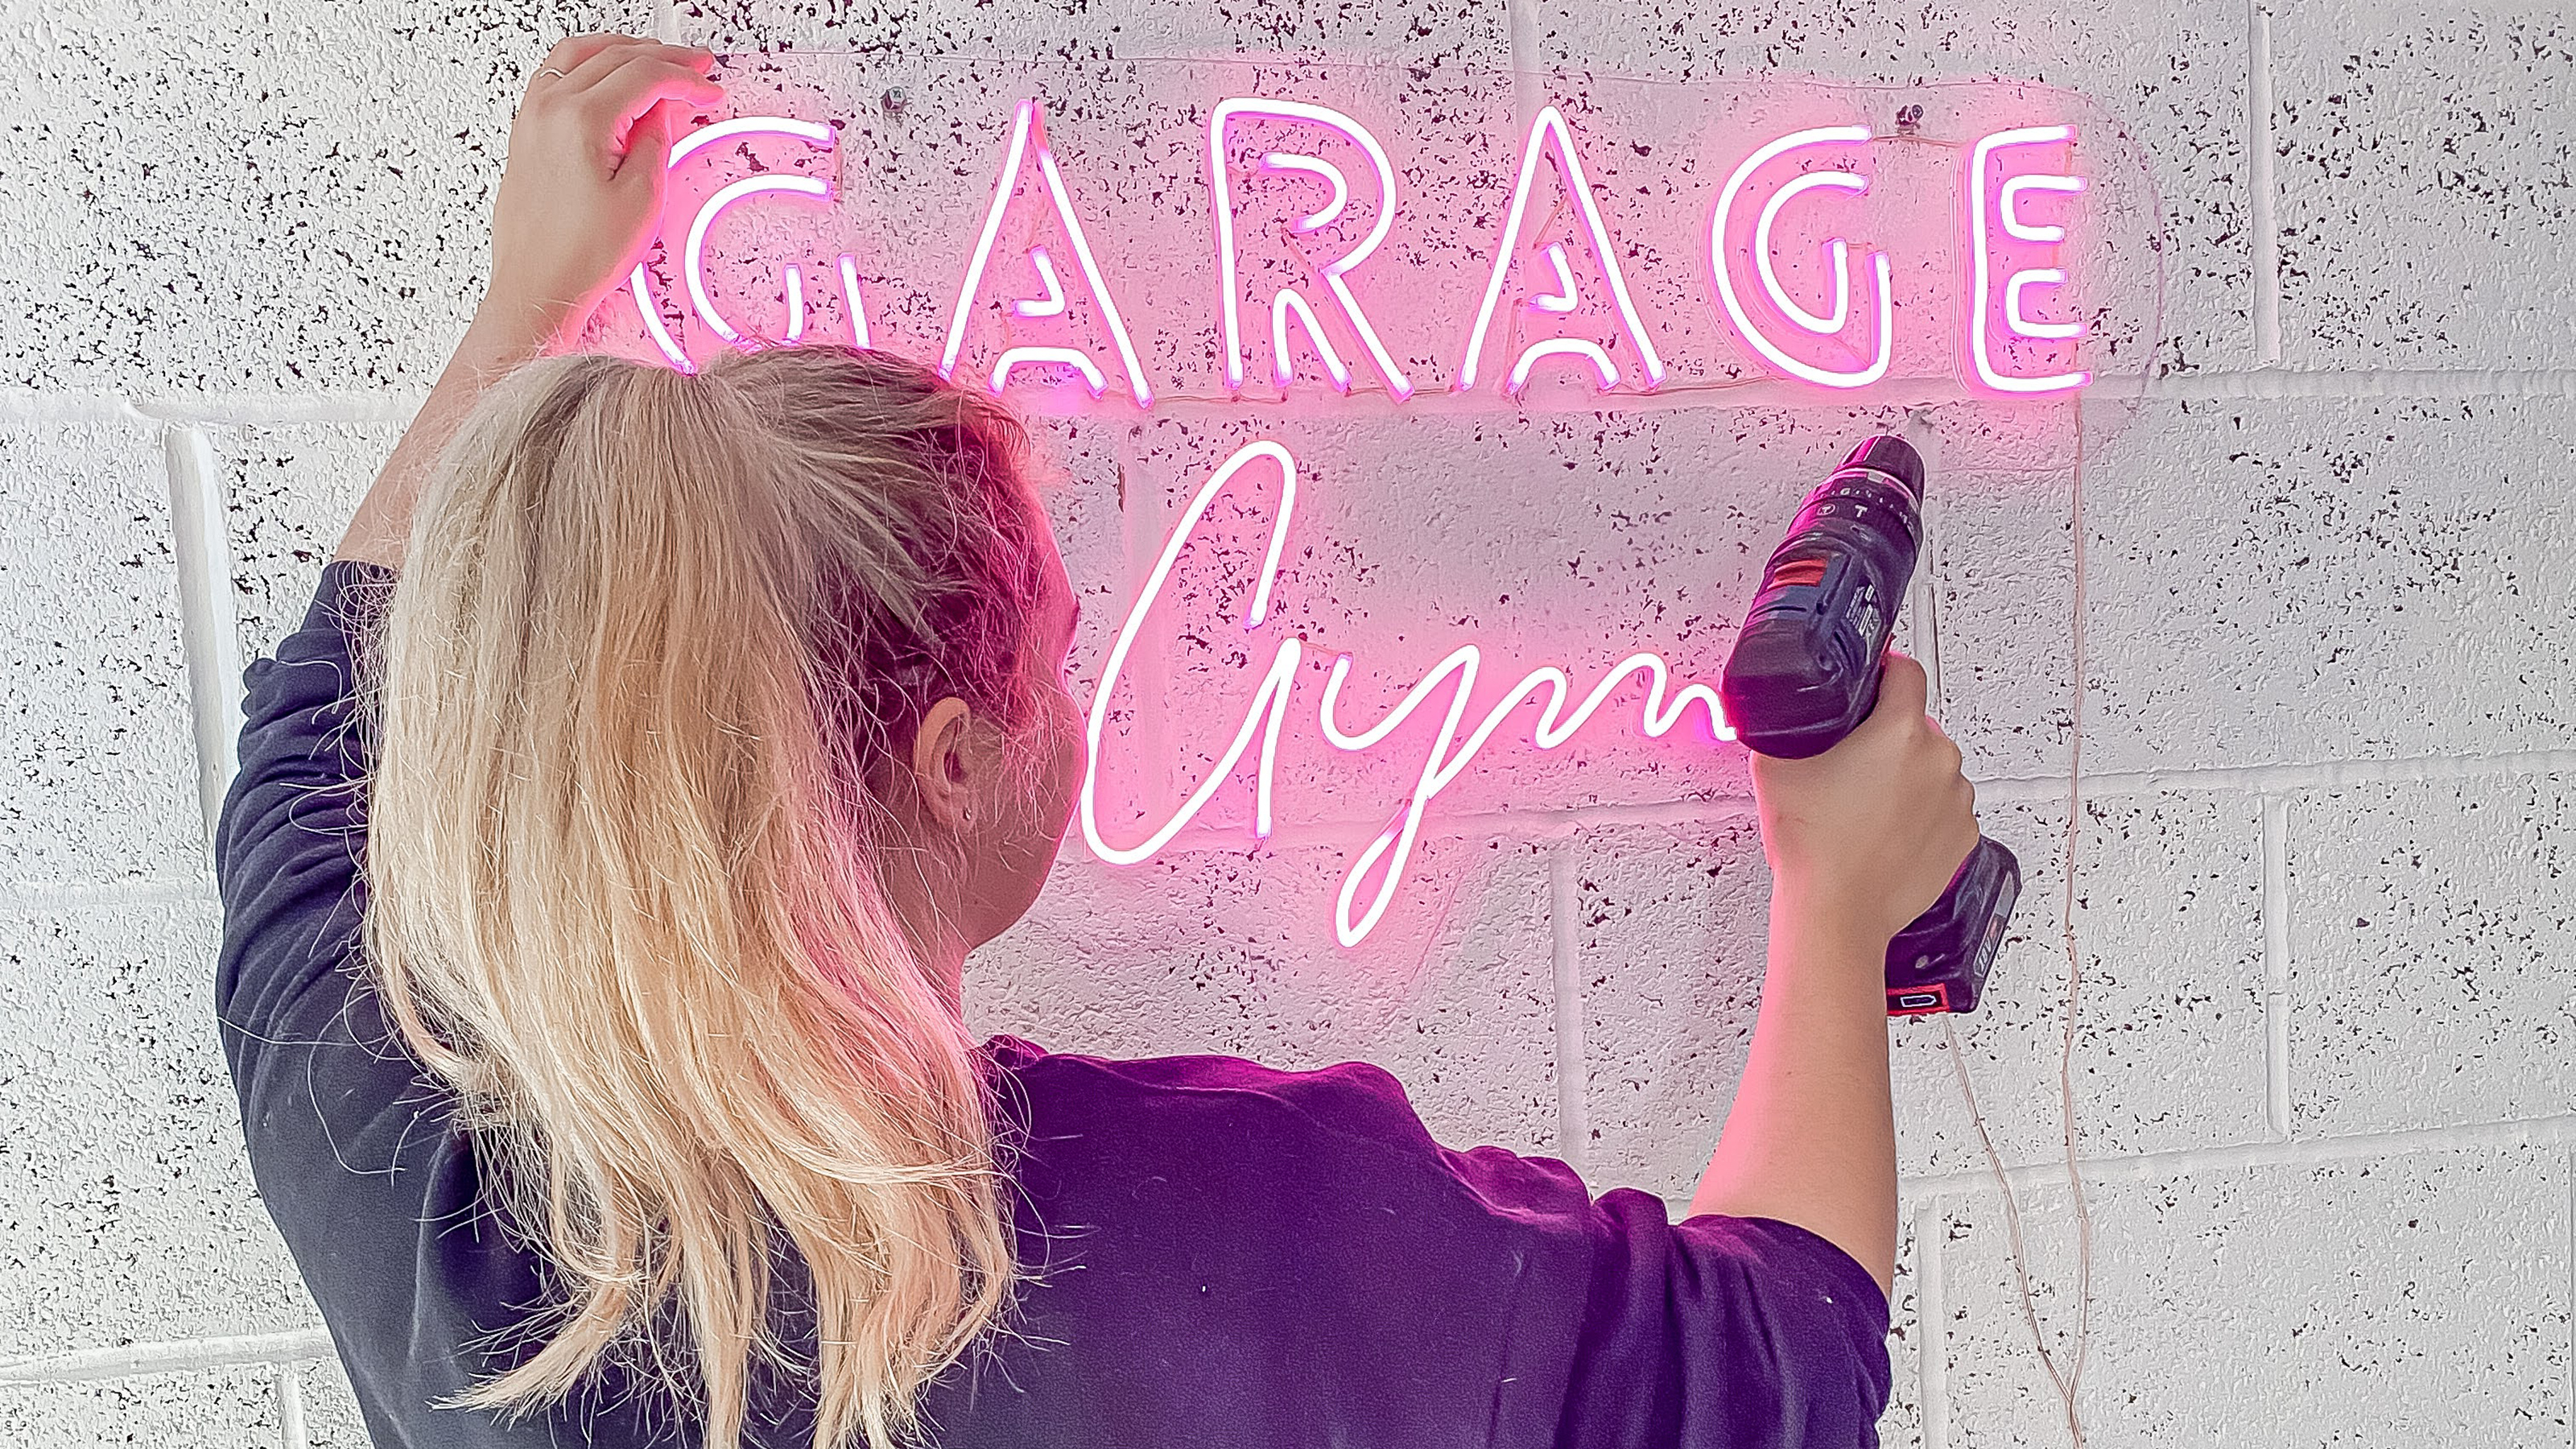 How To Build Your Own LED Neon Signs: A Step-by-Step Guide